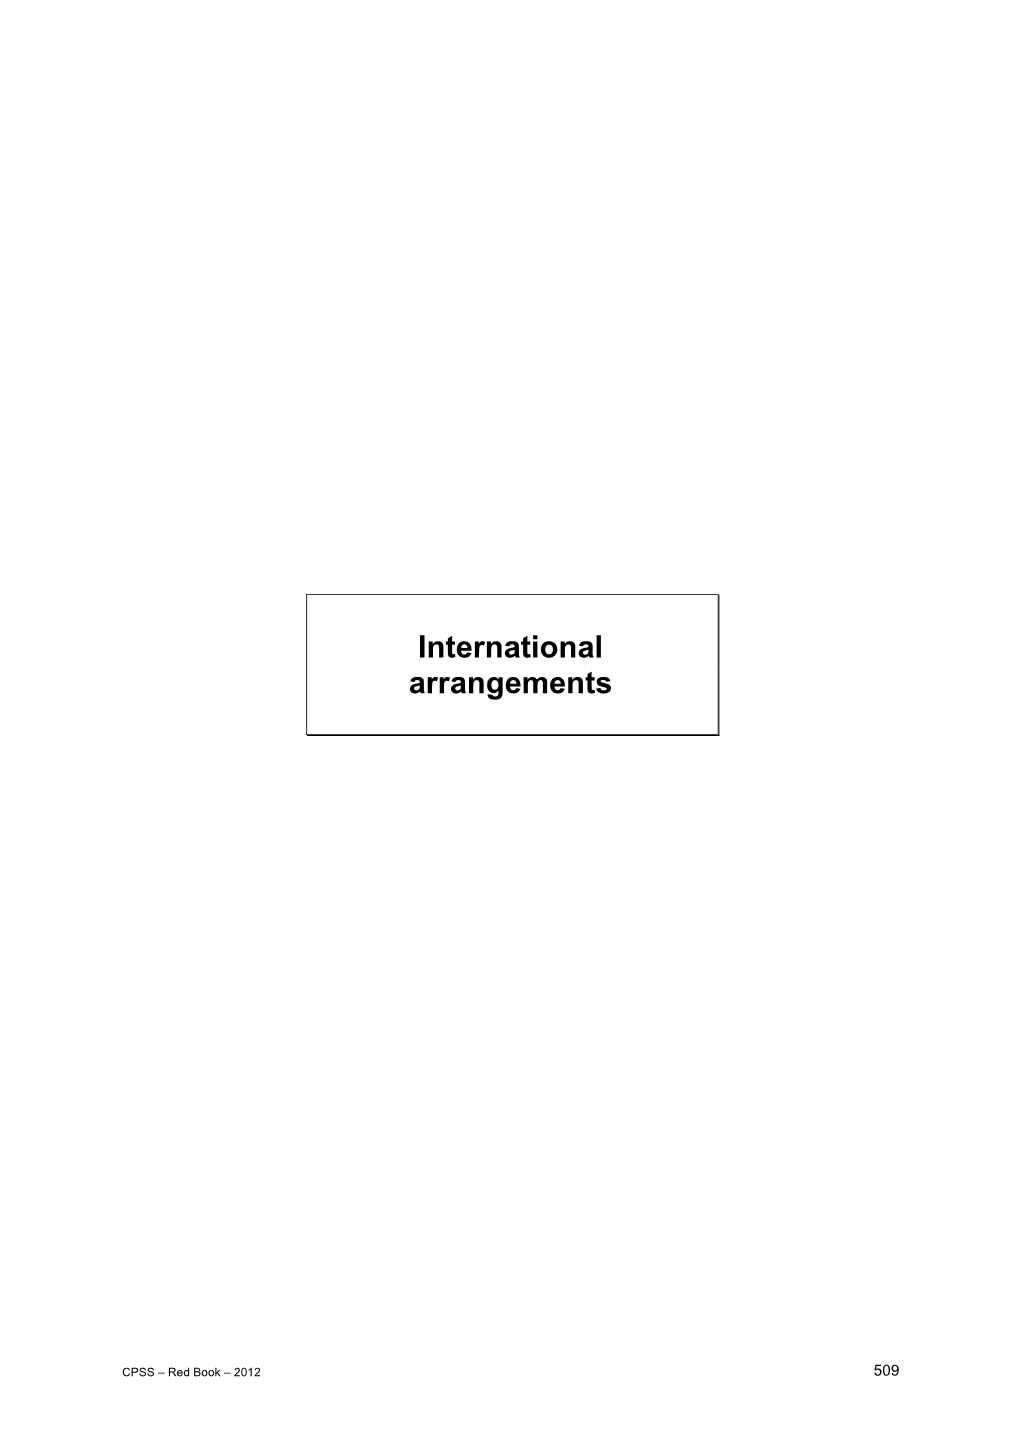 "International Arrangements" of "Payment, Clearing and Settlement